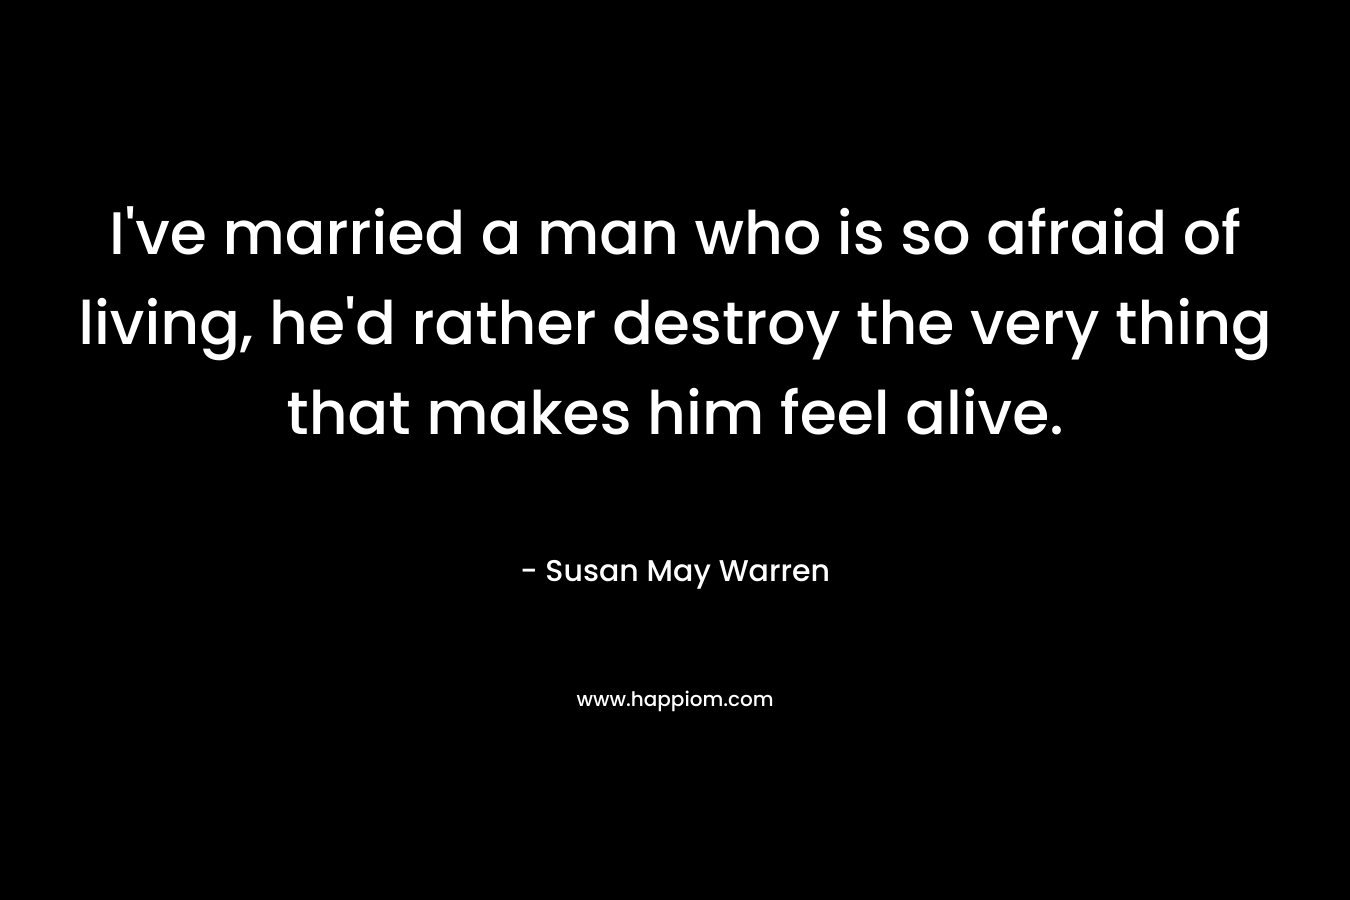 I’ve married a man who is so afraid of living, he’d rather destroy the very thing that makes him feel alive. – Susan May Warren